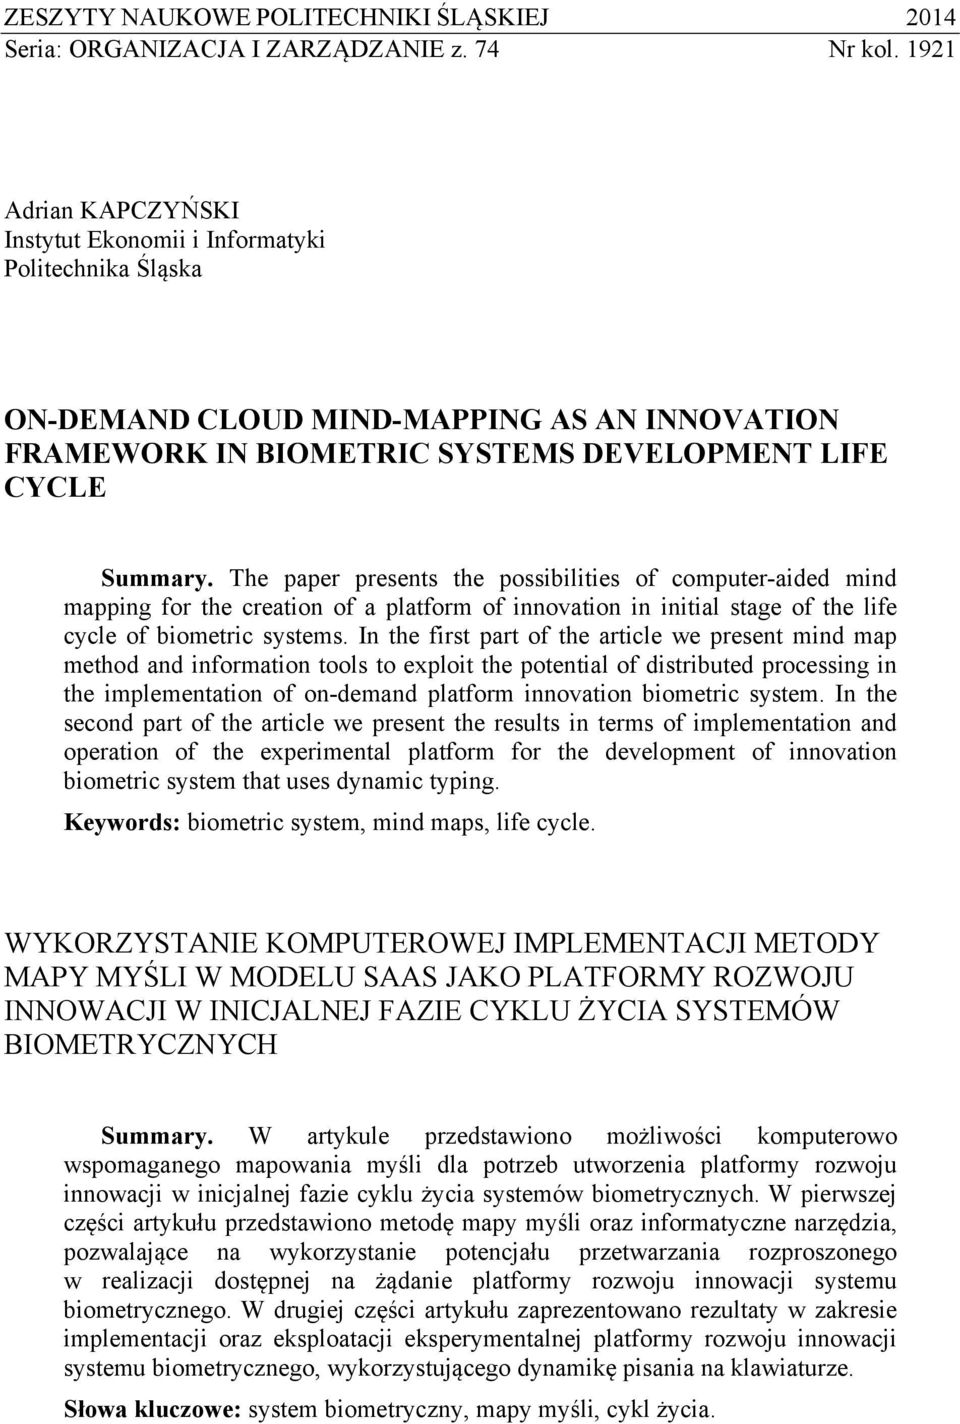 The paper presents the possibilities of computer-aided mind mapping for the creation of a platform of innovation in initial stage of the life cycle of biometric systems.